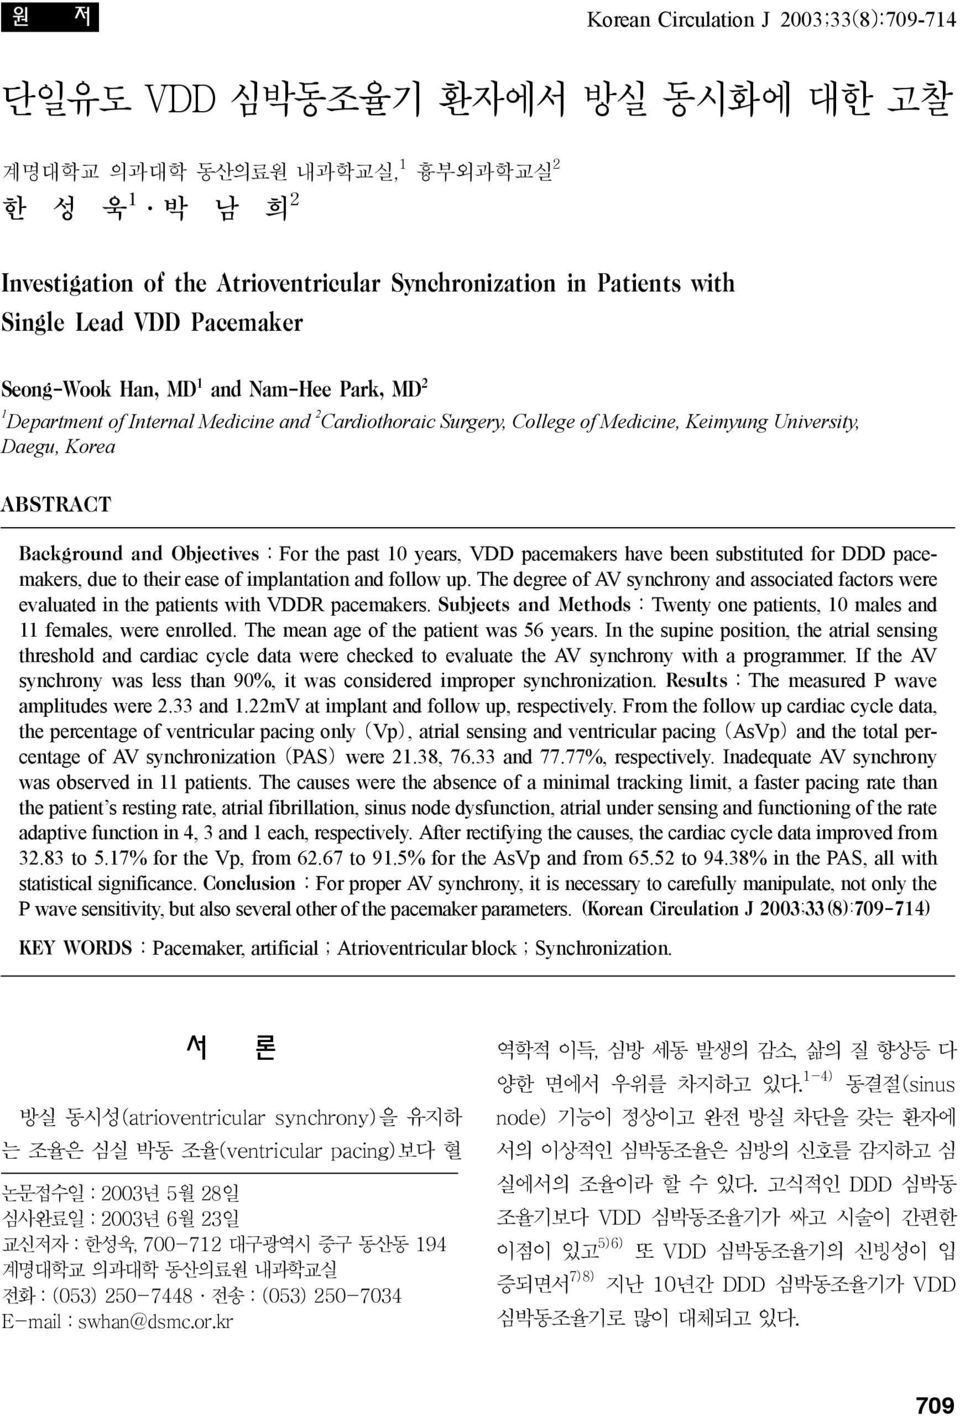 ABSTRACT Background and Objectives:For the past 10 years, VDD pacemakers have been substituted for DDD pacemakers, due to their ease of implantation and follow up.